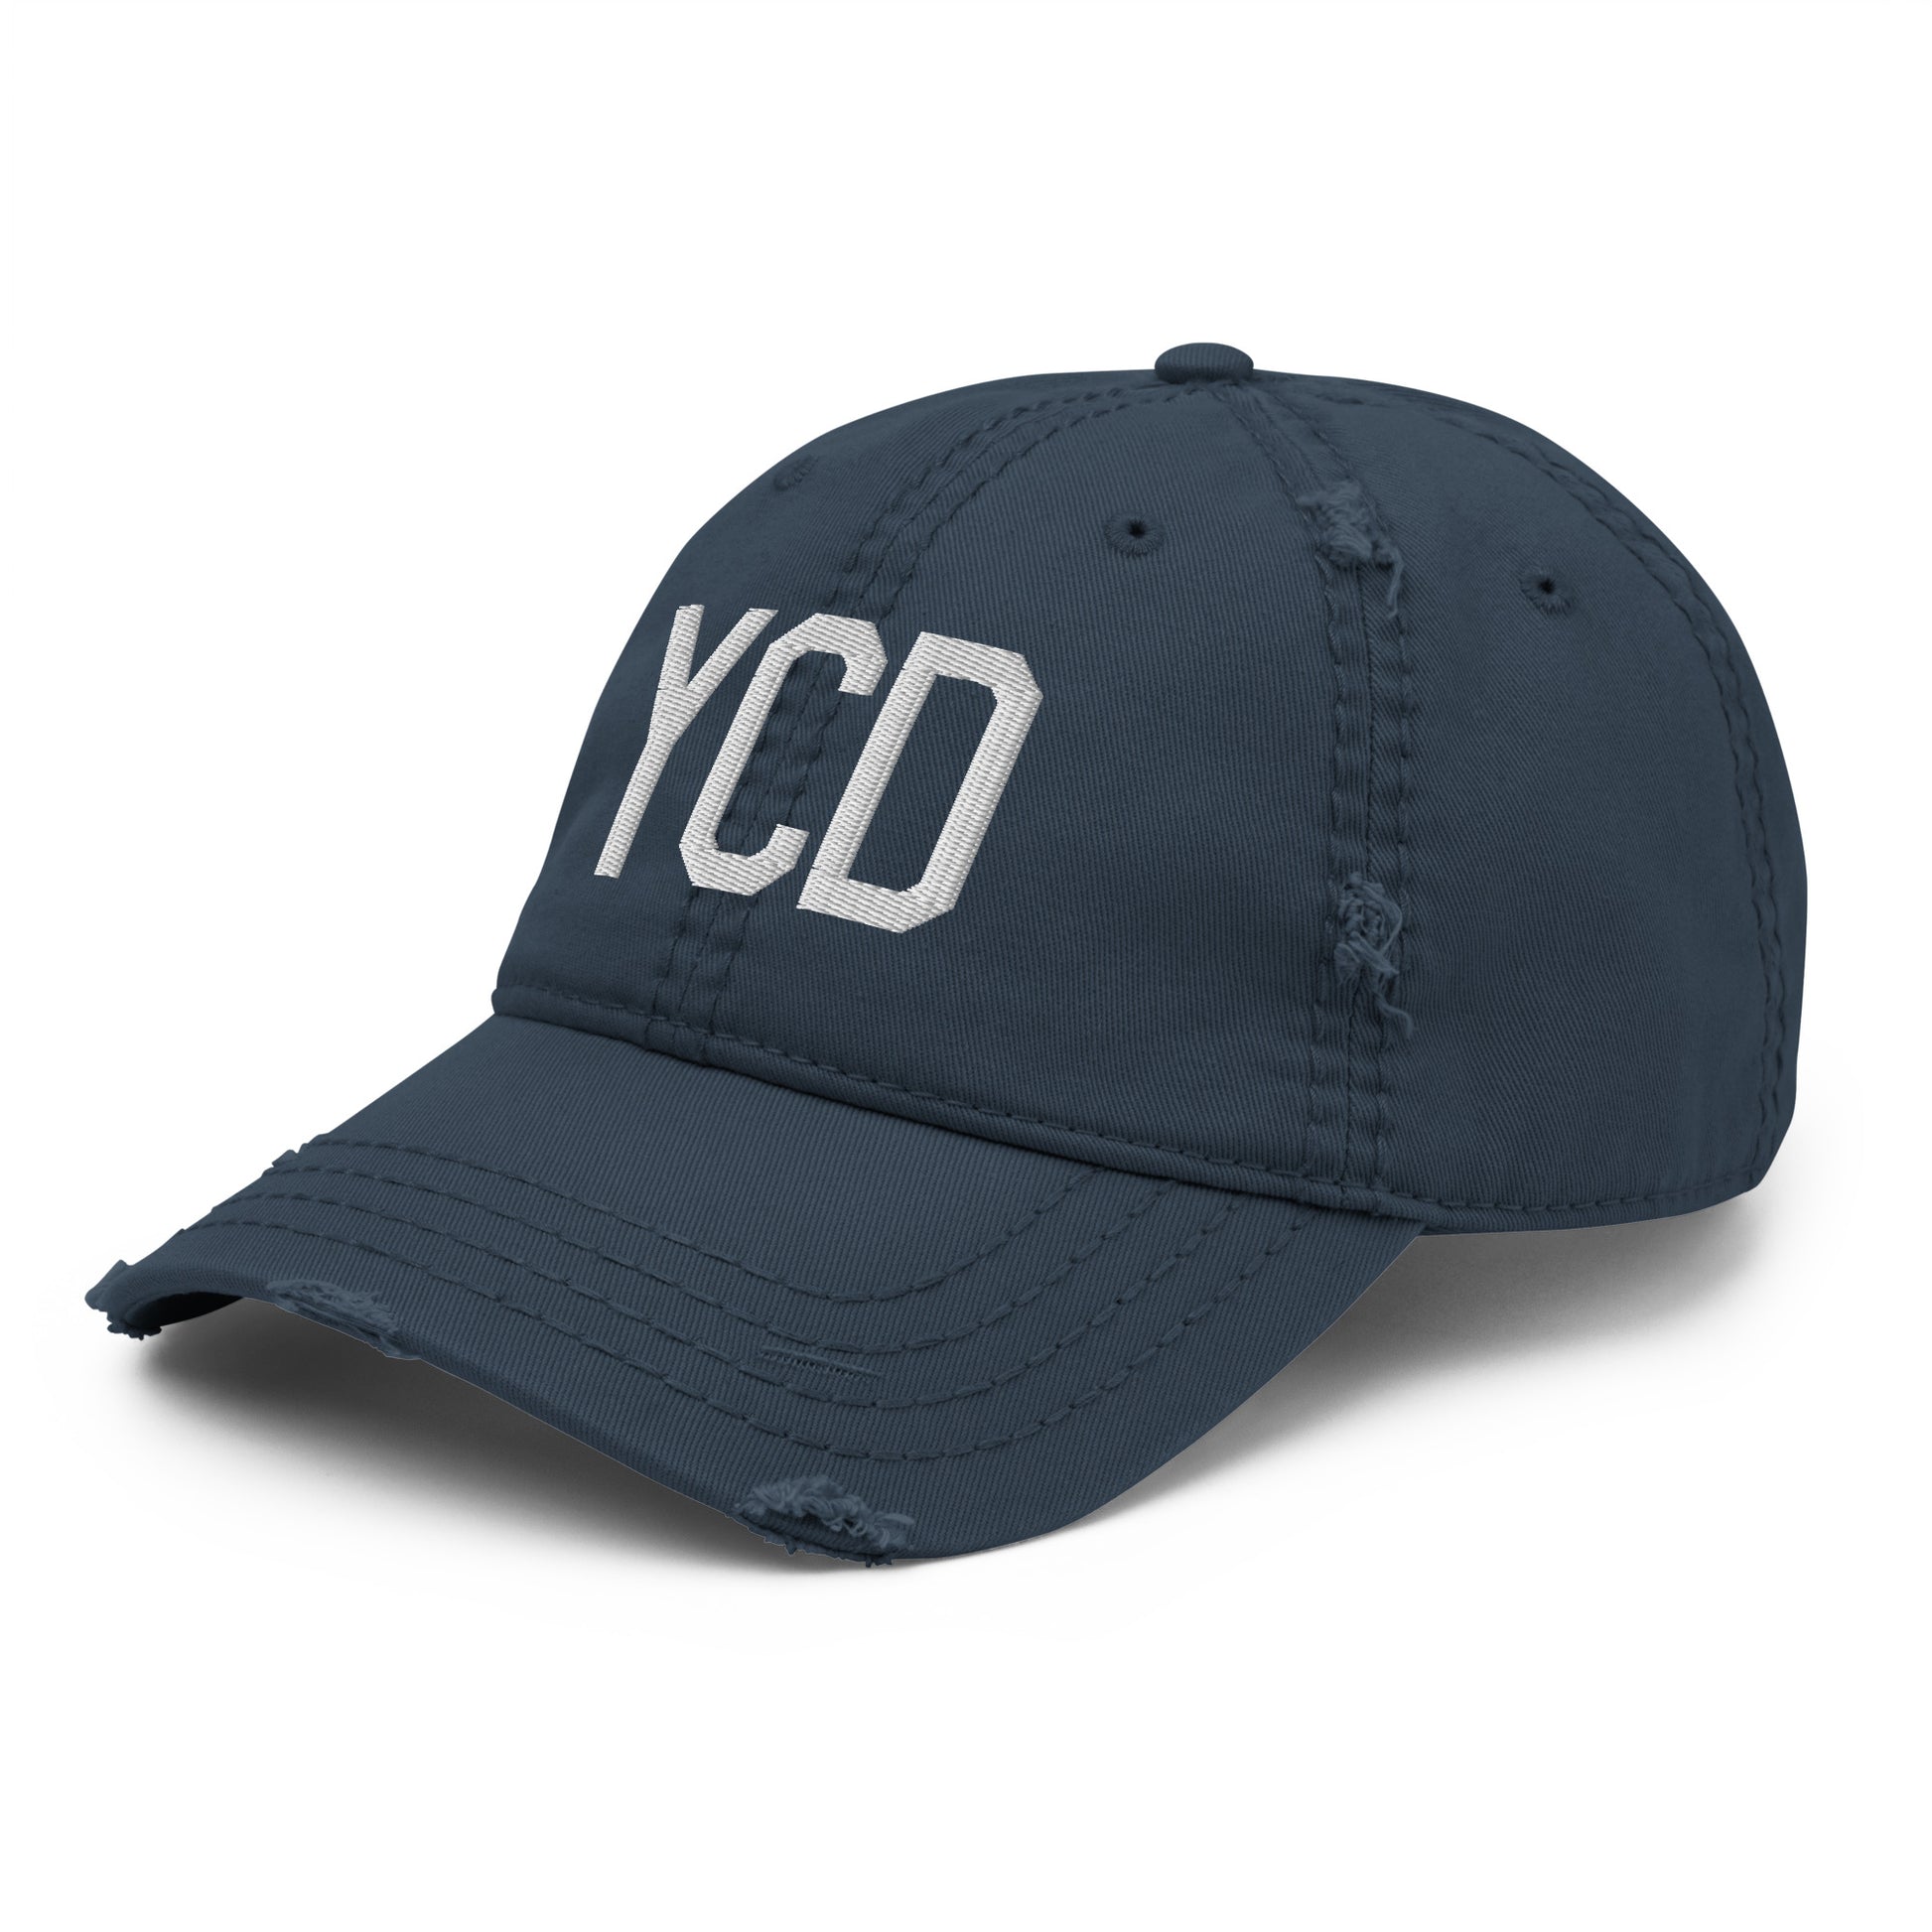 Airport Code Distressed Hat - White • YCD Nanaimo • YHM Designs - Image 01